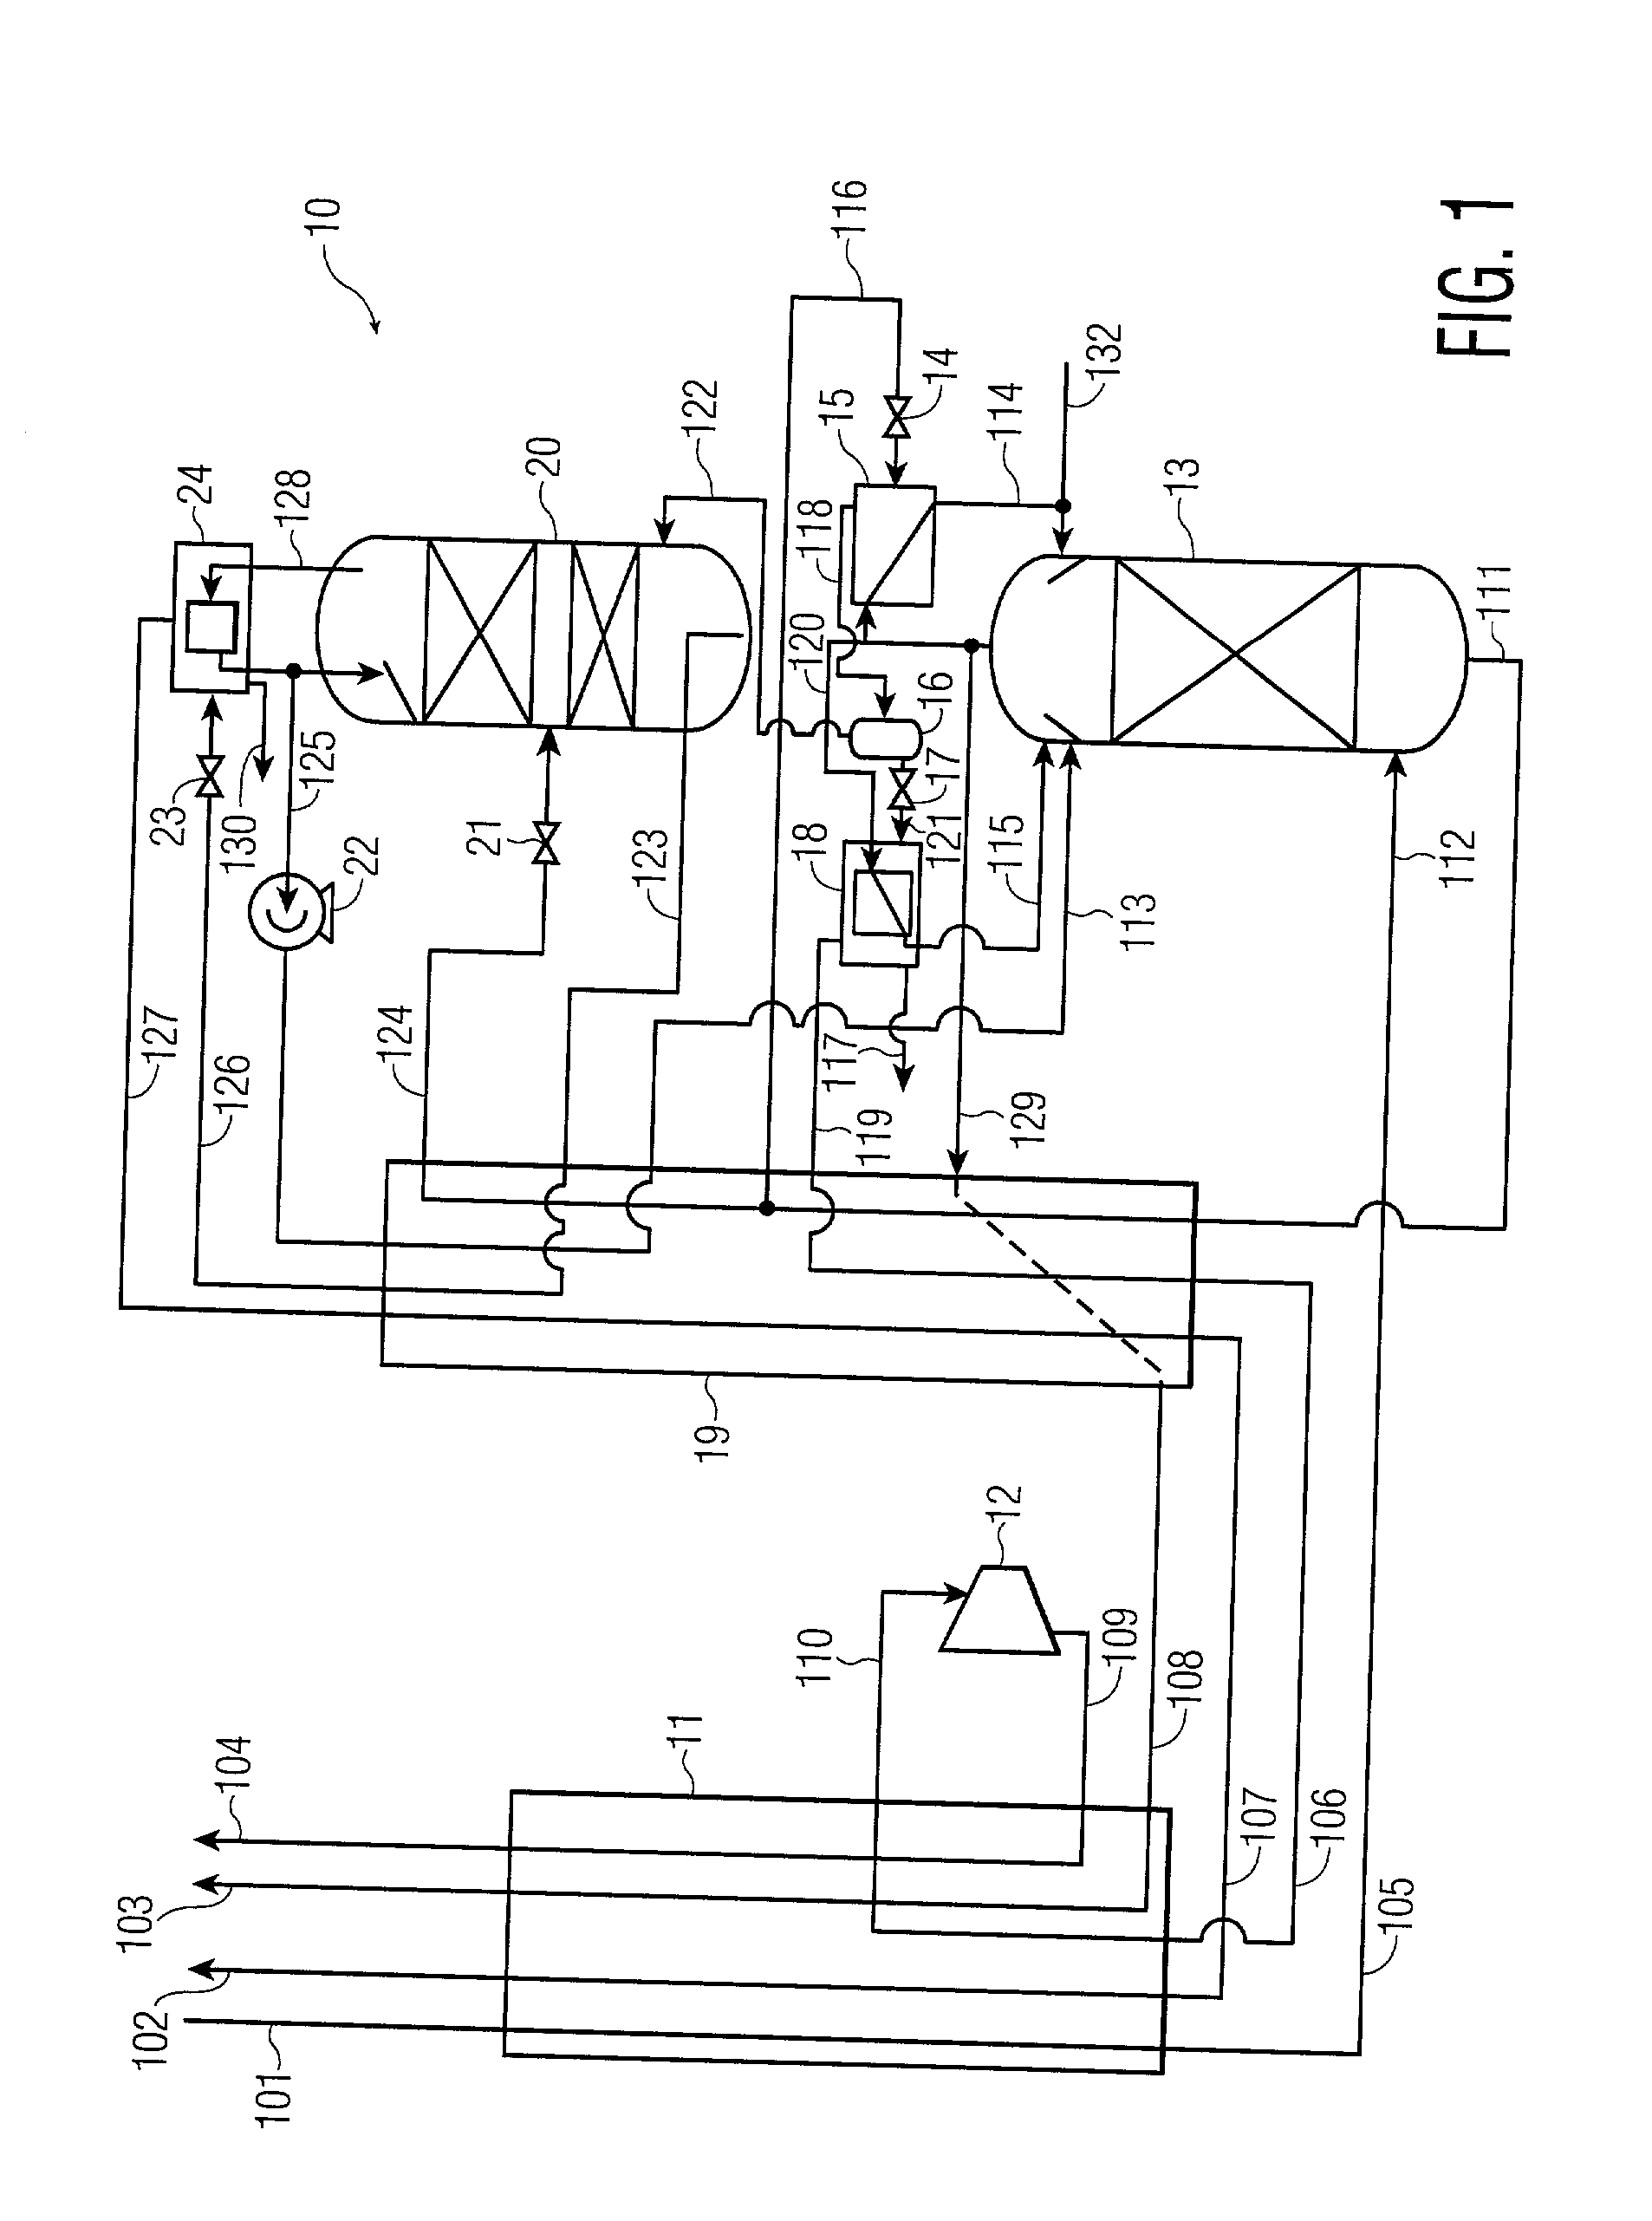 Method and apparatus for producing nitrogen from air by cryogenic distillation